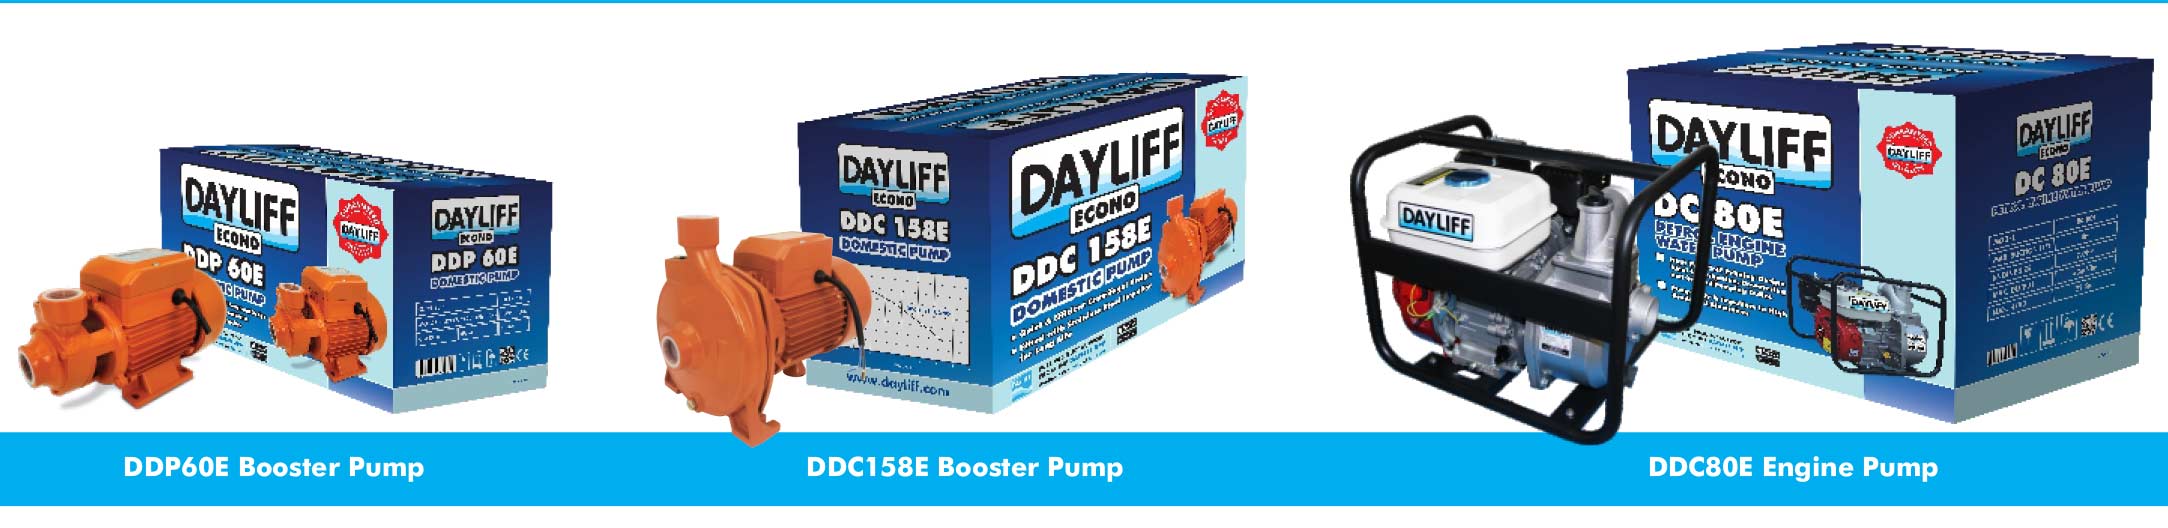 The Dayliff Econo is a pocket friendly pump which is new in the market and a dependable product